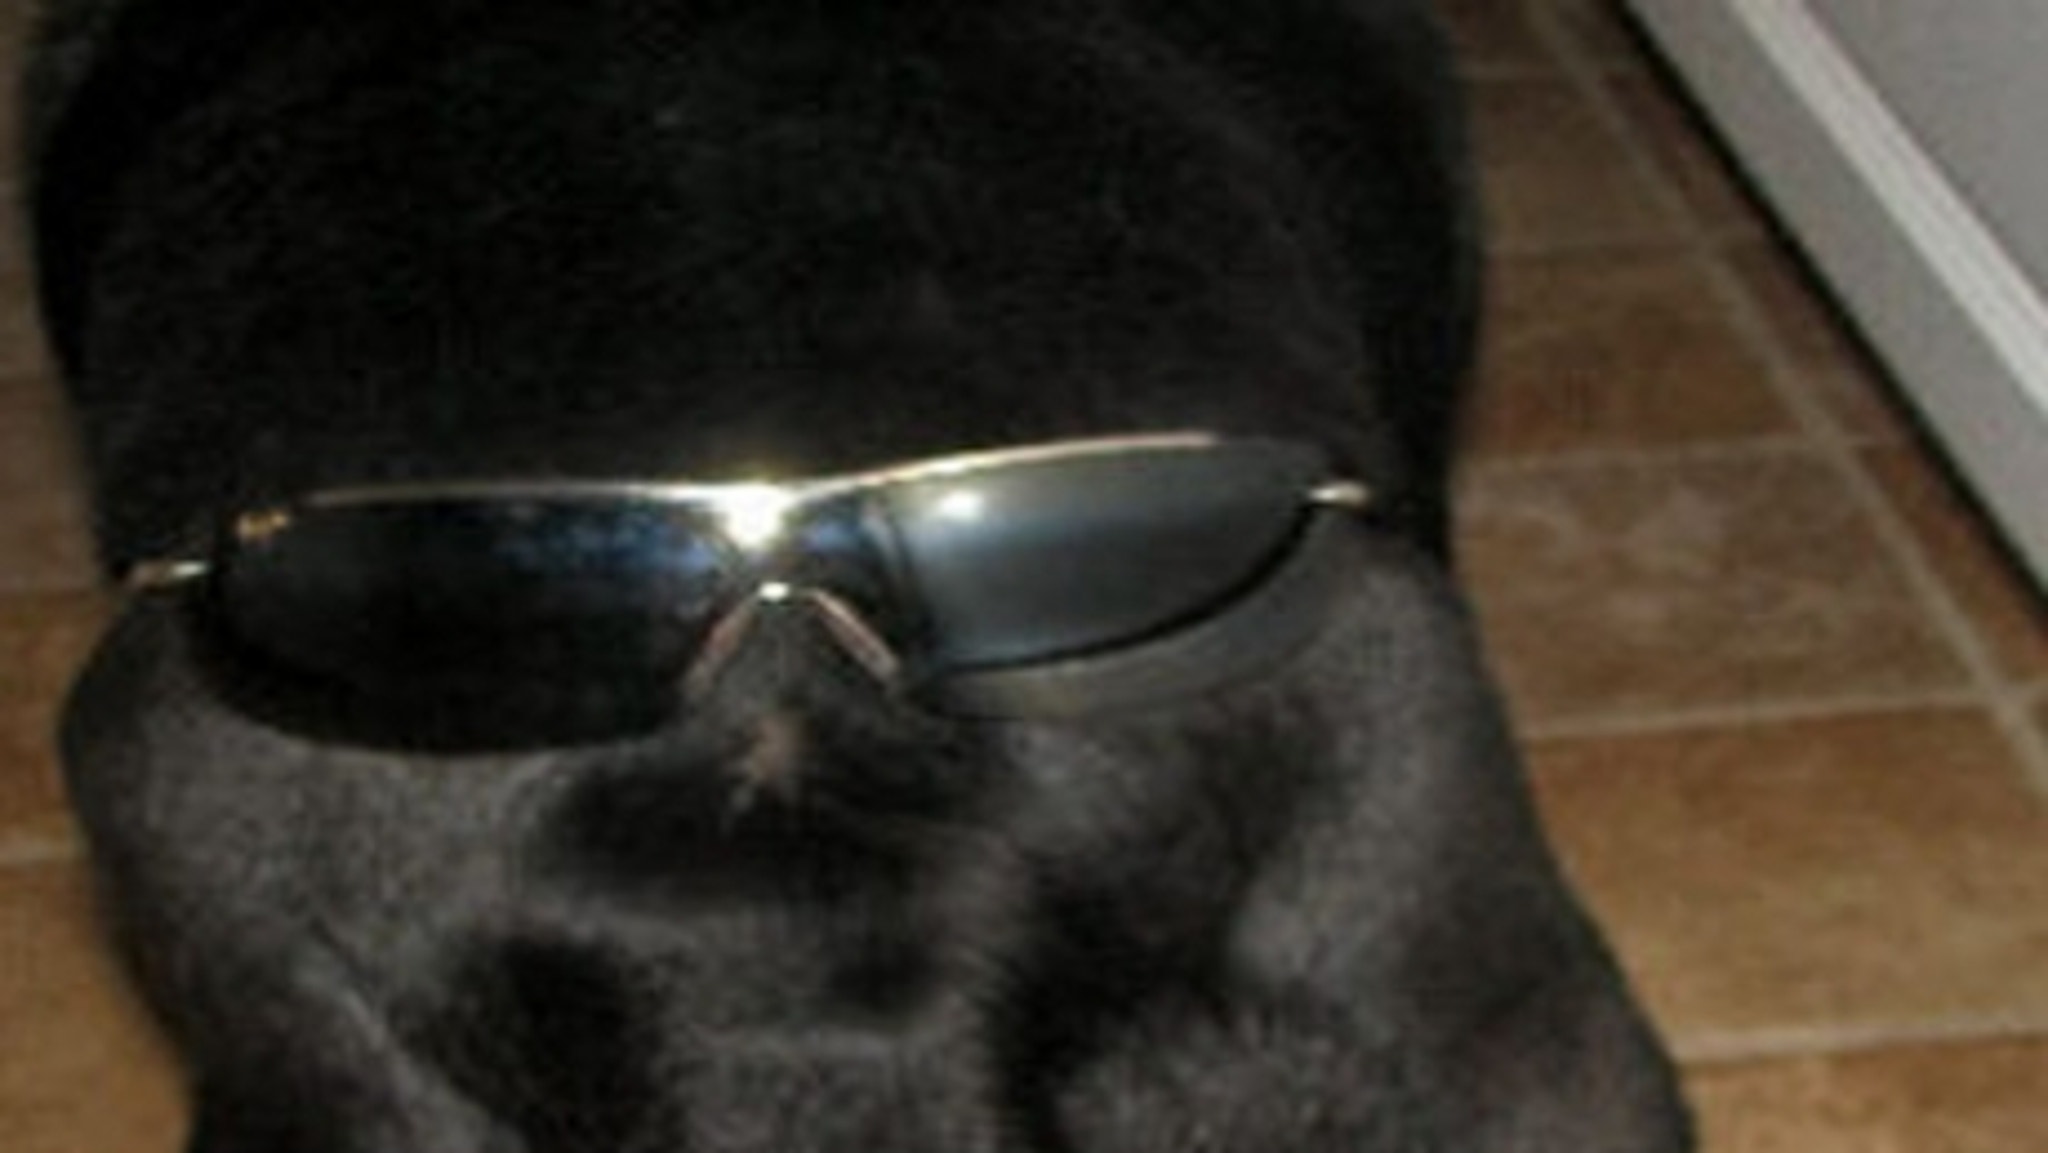 TMZs Shades On A Mutts Butt Contest